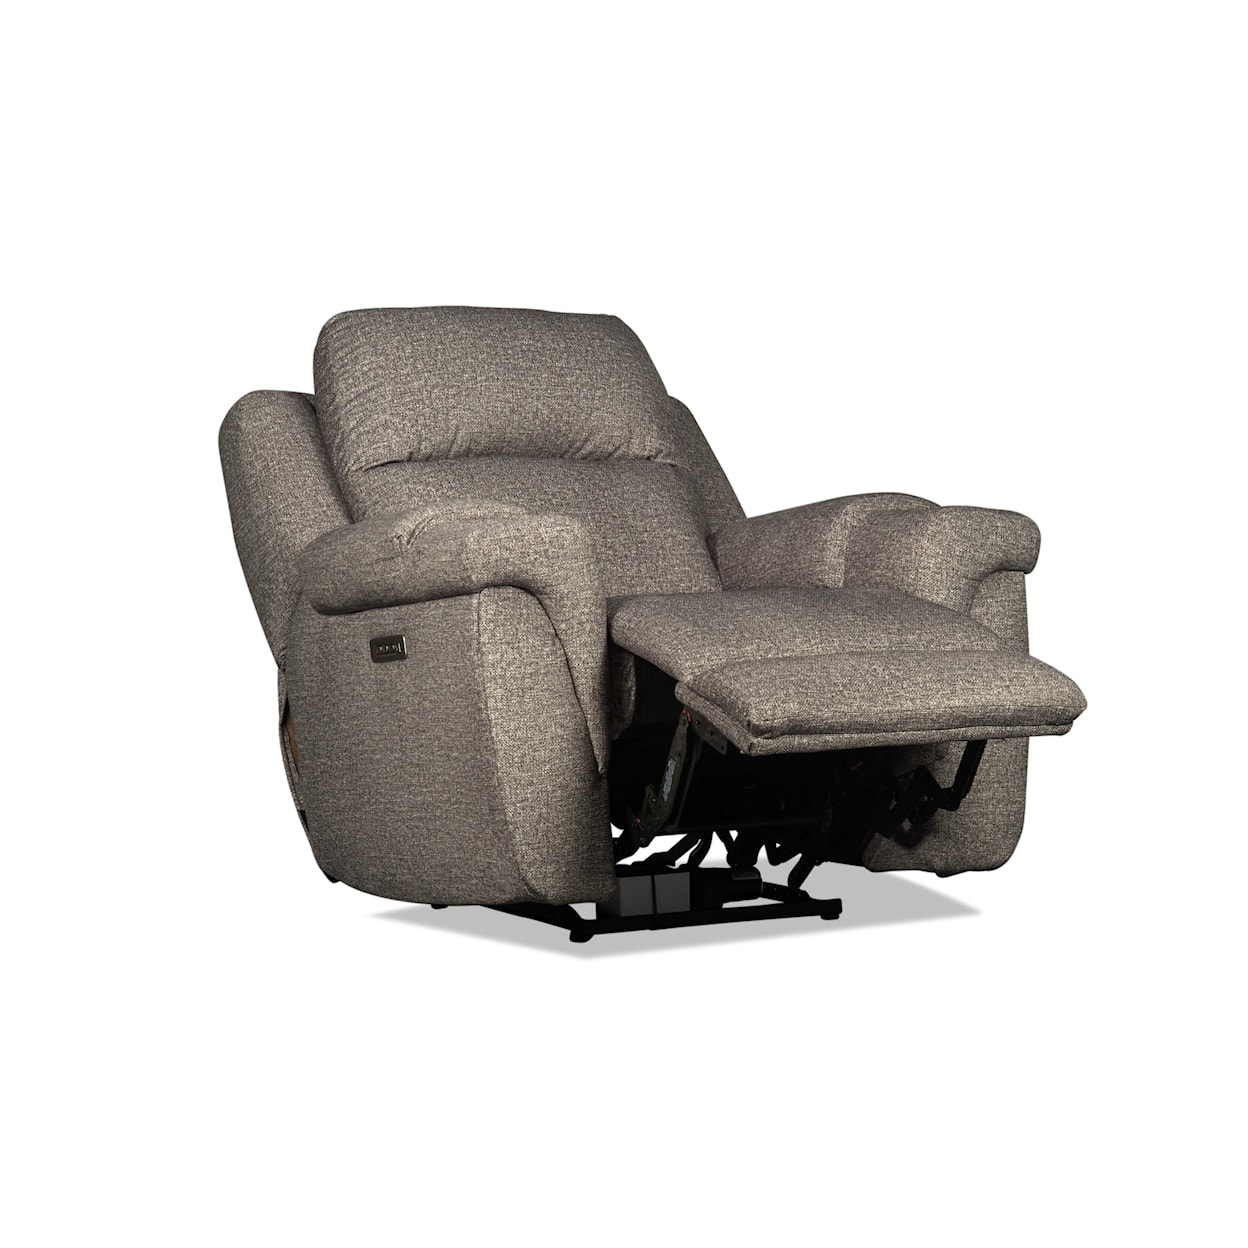 Southern Motion William William Power Recliner